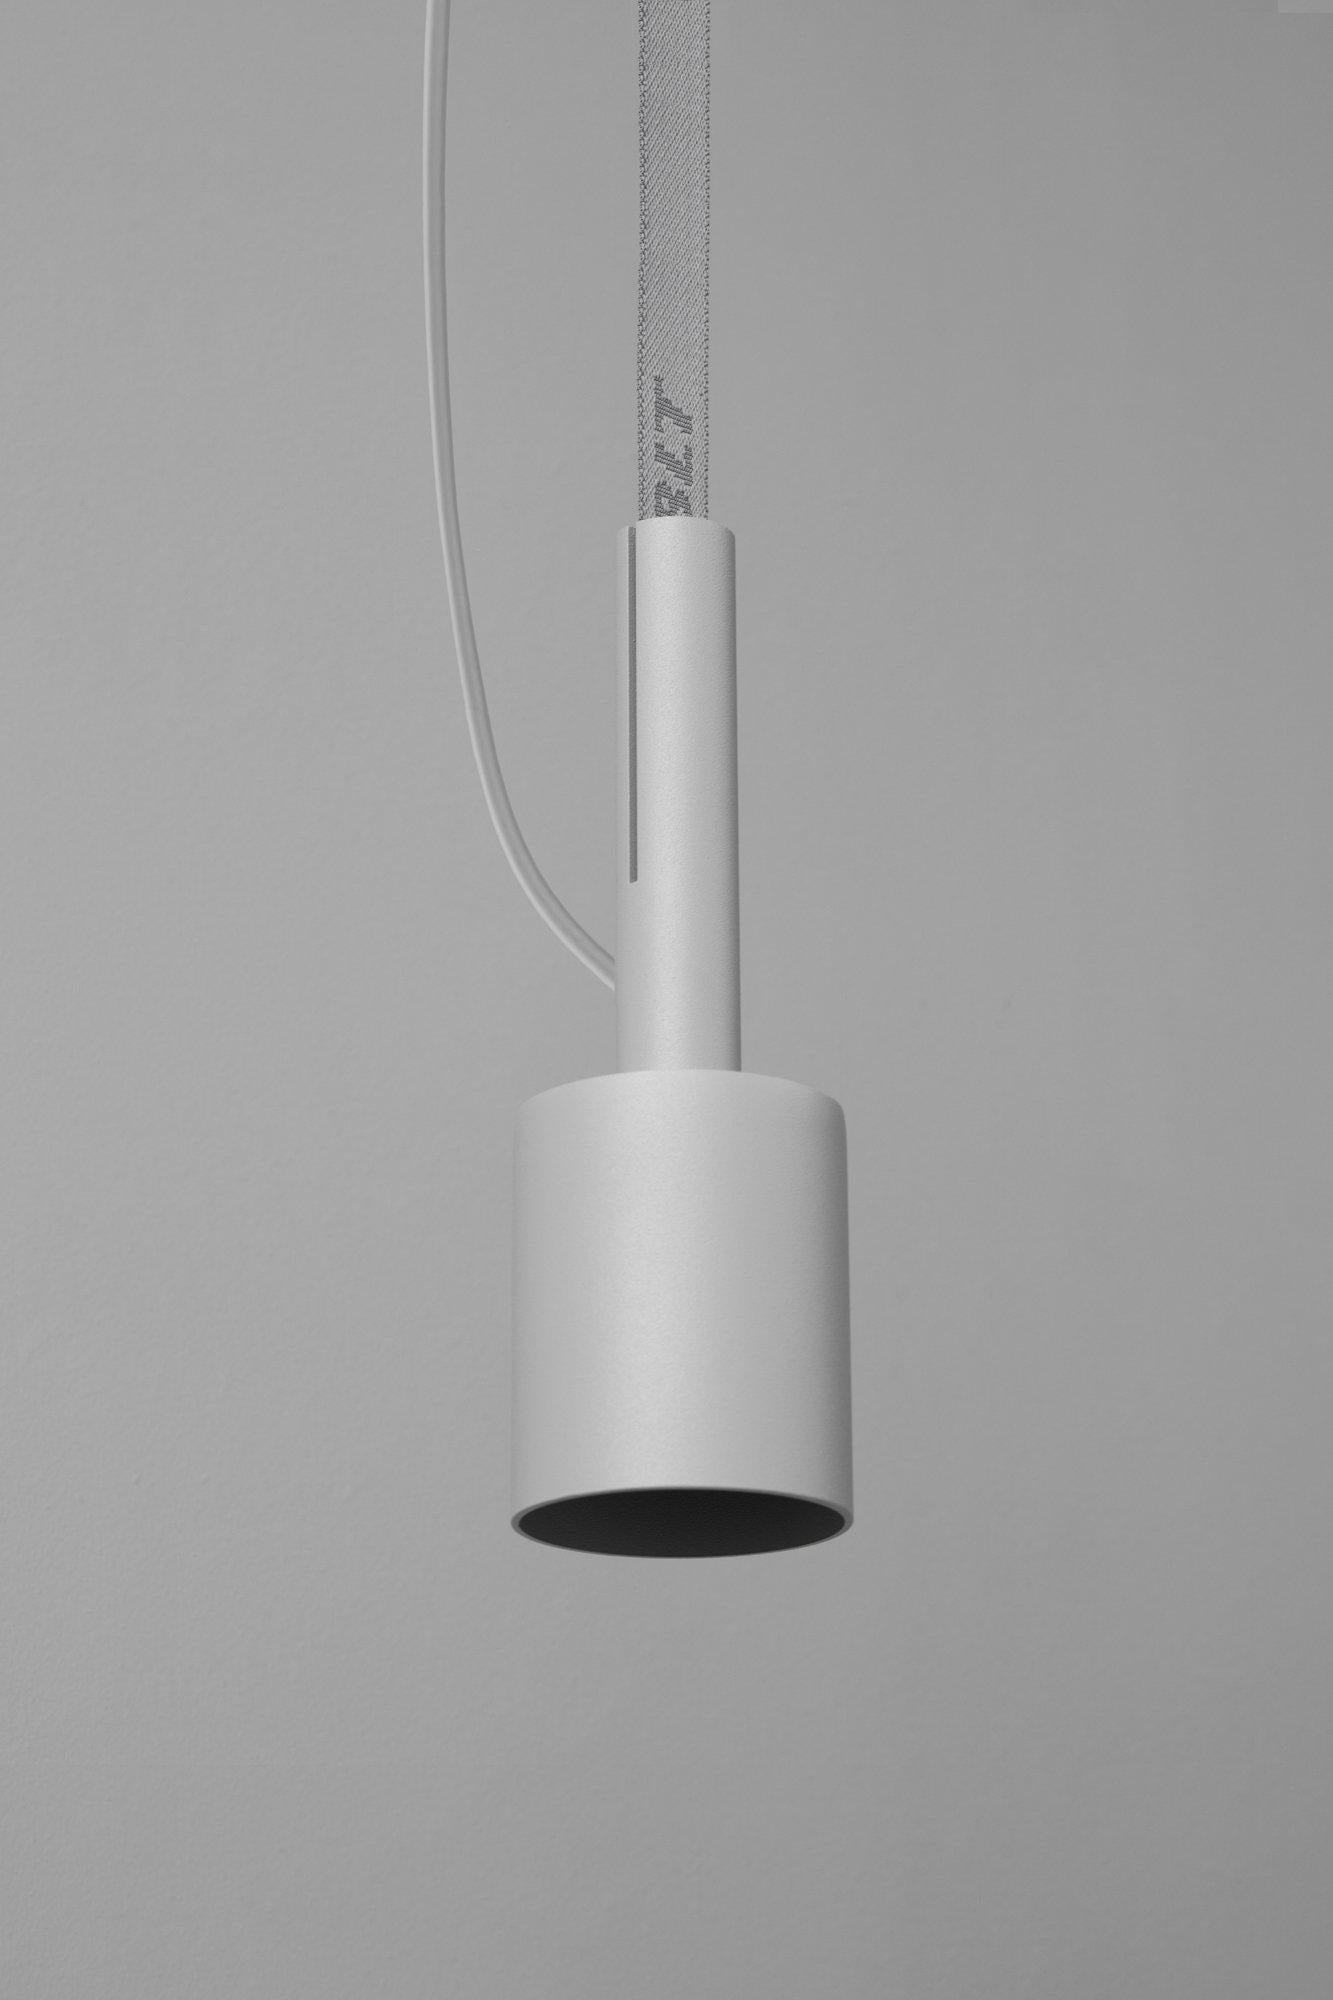 BLT_5 Grey Pendant Lamp by +kouple
Dimensions: Ø 8 x H 25,2 cm. 
Materials: Powder-coated steel and textile.

Available in different color options. The rod length is 250 cm. Please contact us.

All our lamps can be wired according to each country.